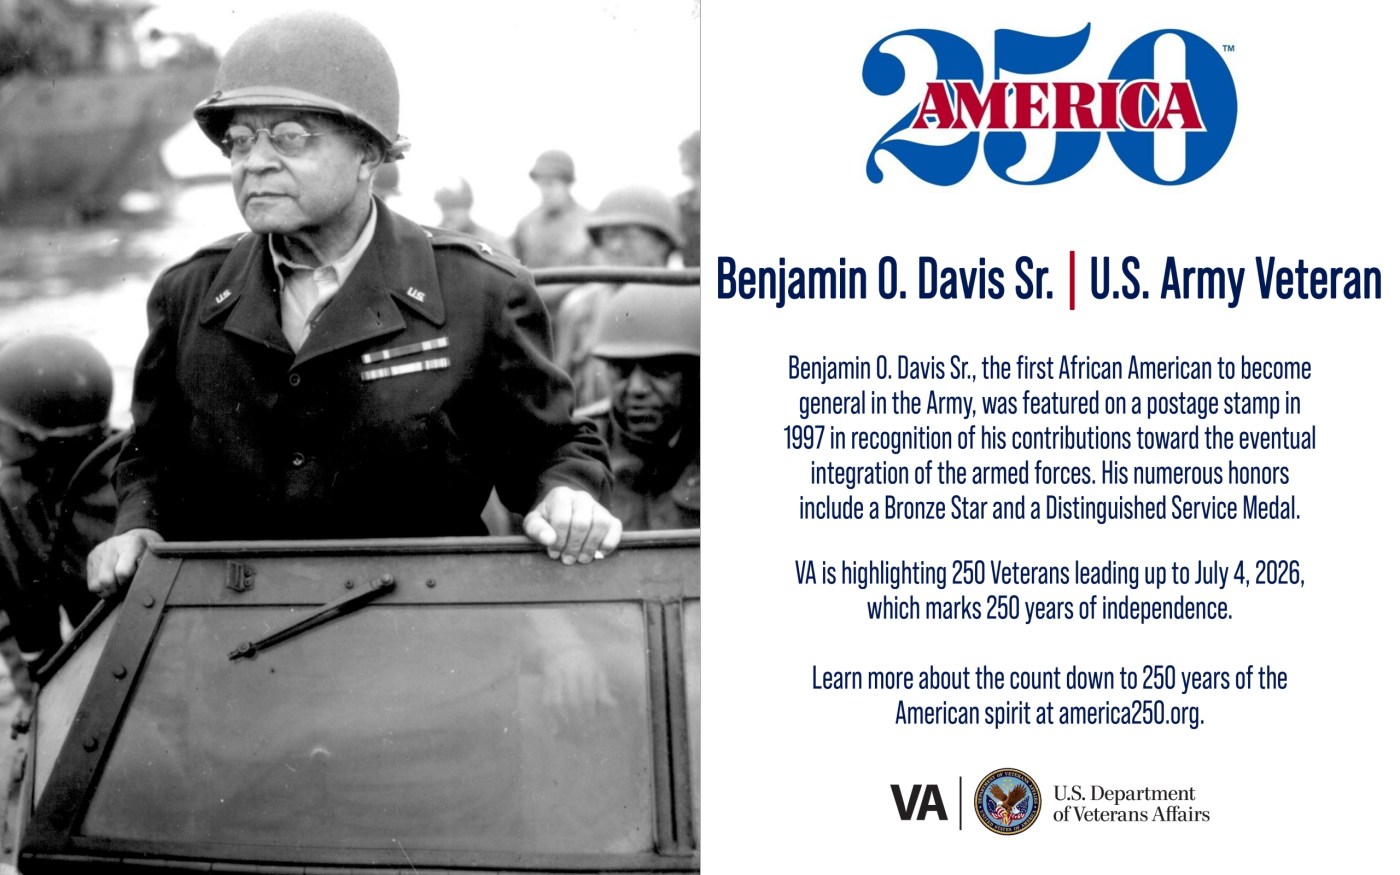 This week’s America250 salute is Army Veteran Benjamin O. Davis Sr., who was the first African American to become a general in the Army.